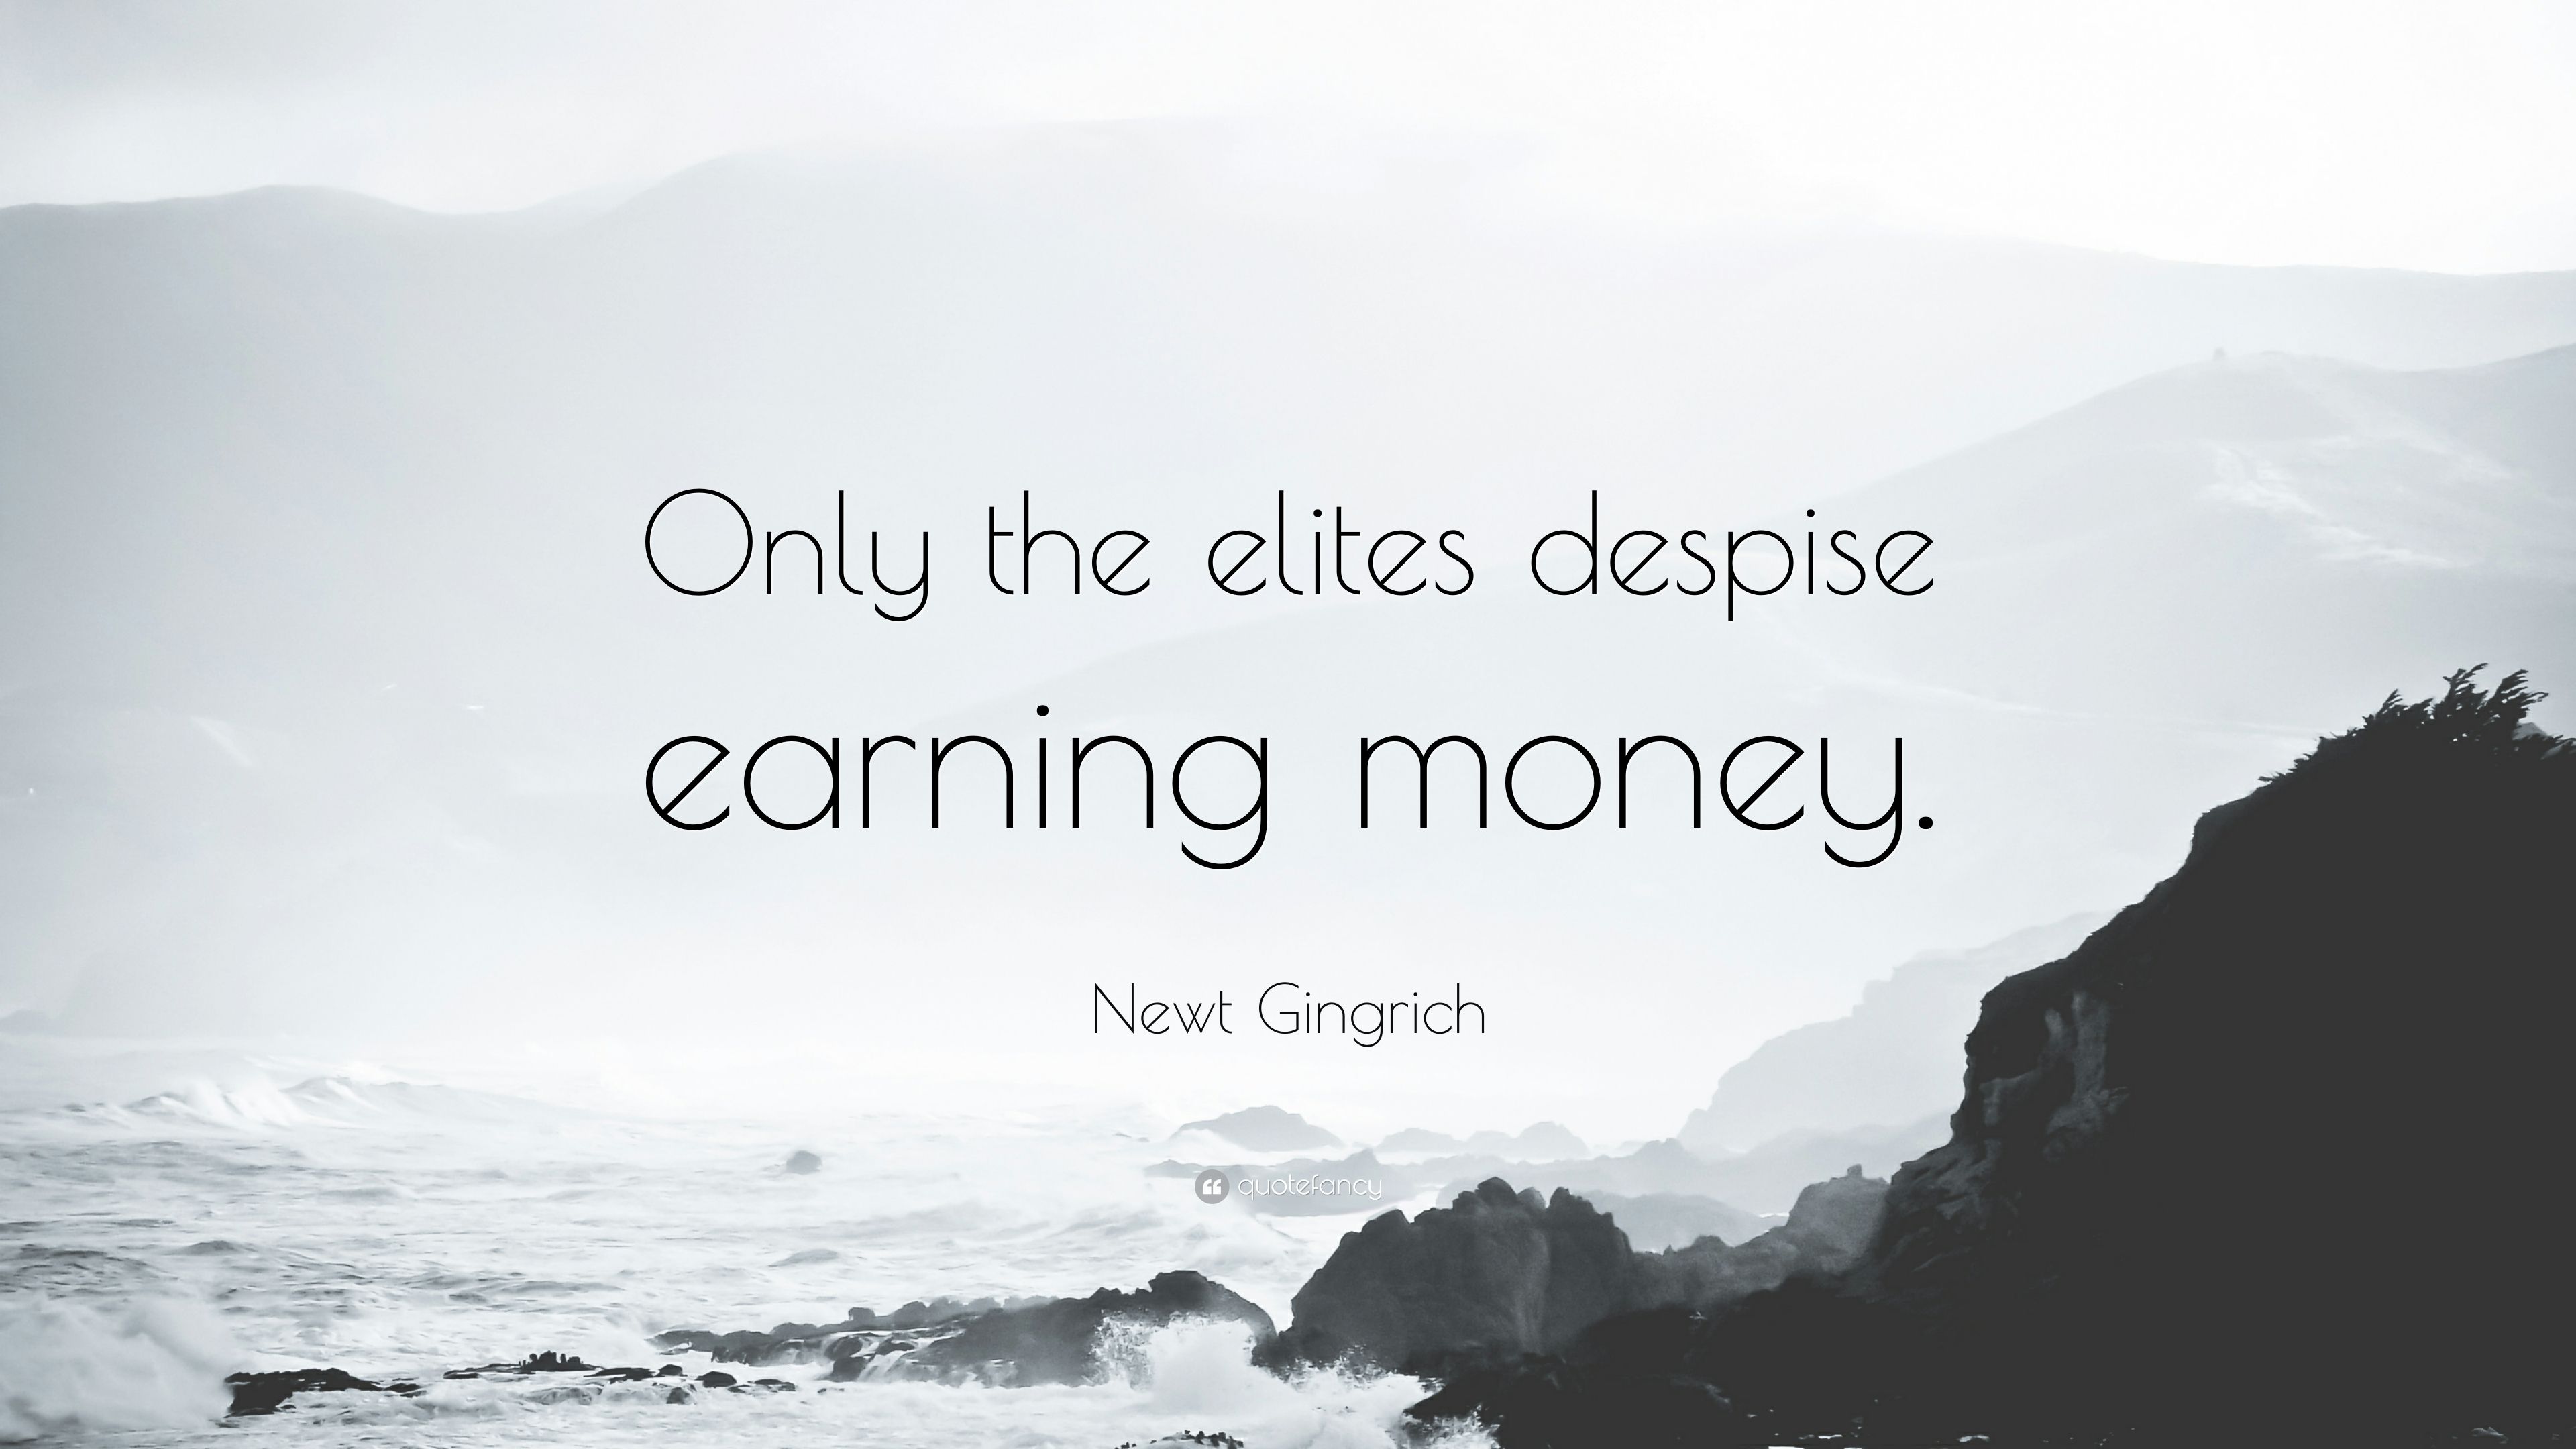 Newt Gingrich Quote: “Only the elites despise earning money.” (7 wallpaper)